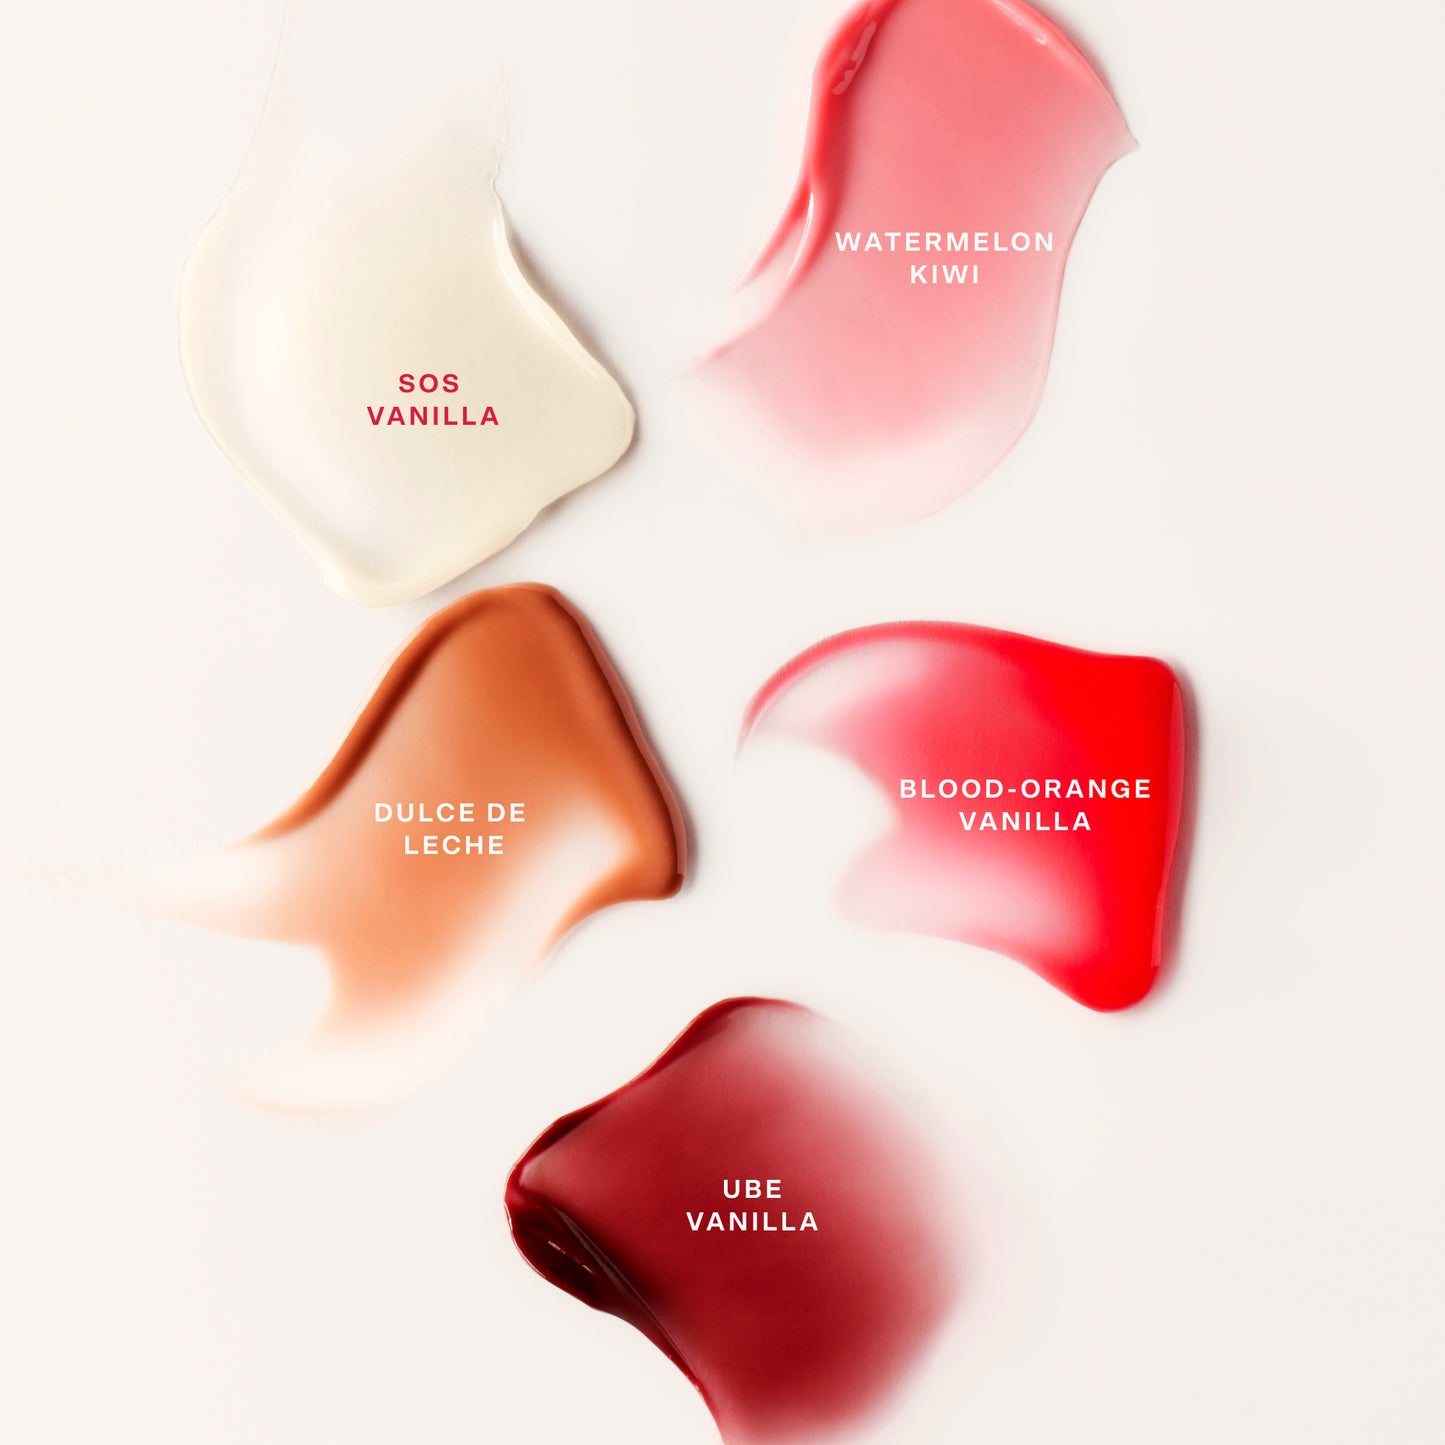 [Shared: Product texture swatches of Tower 28 Beauty LipSoftie™ Lip Treatment on a white background]